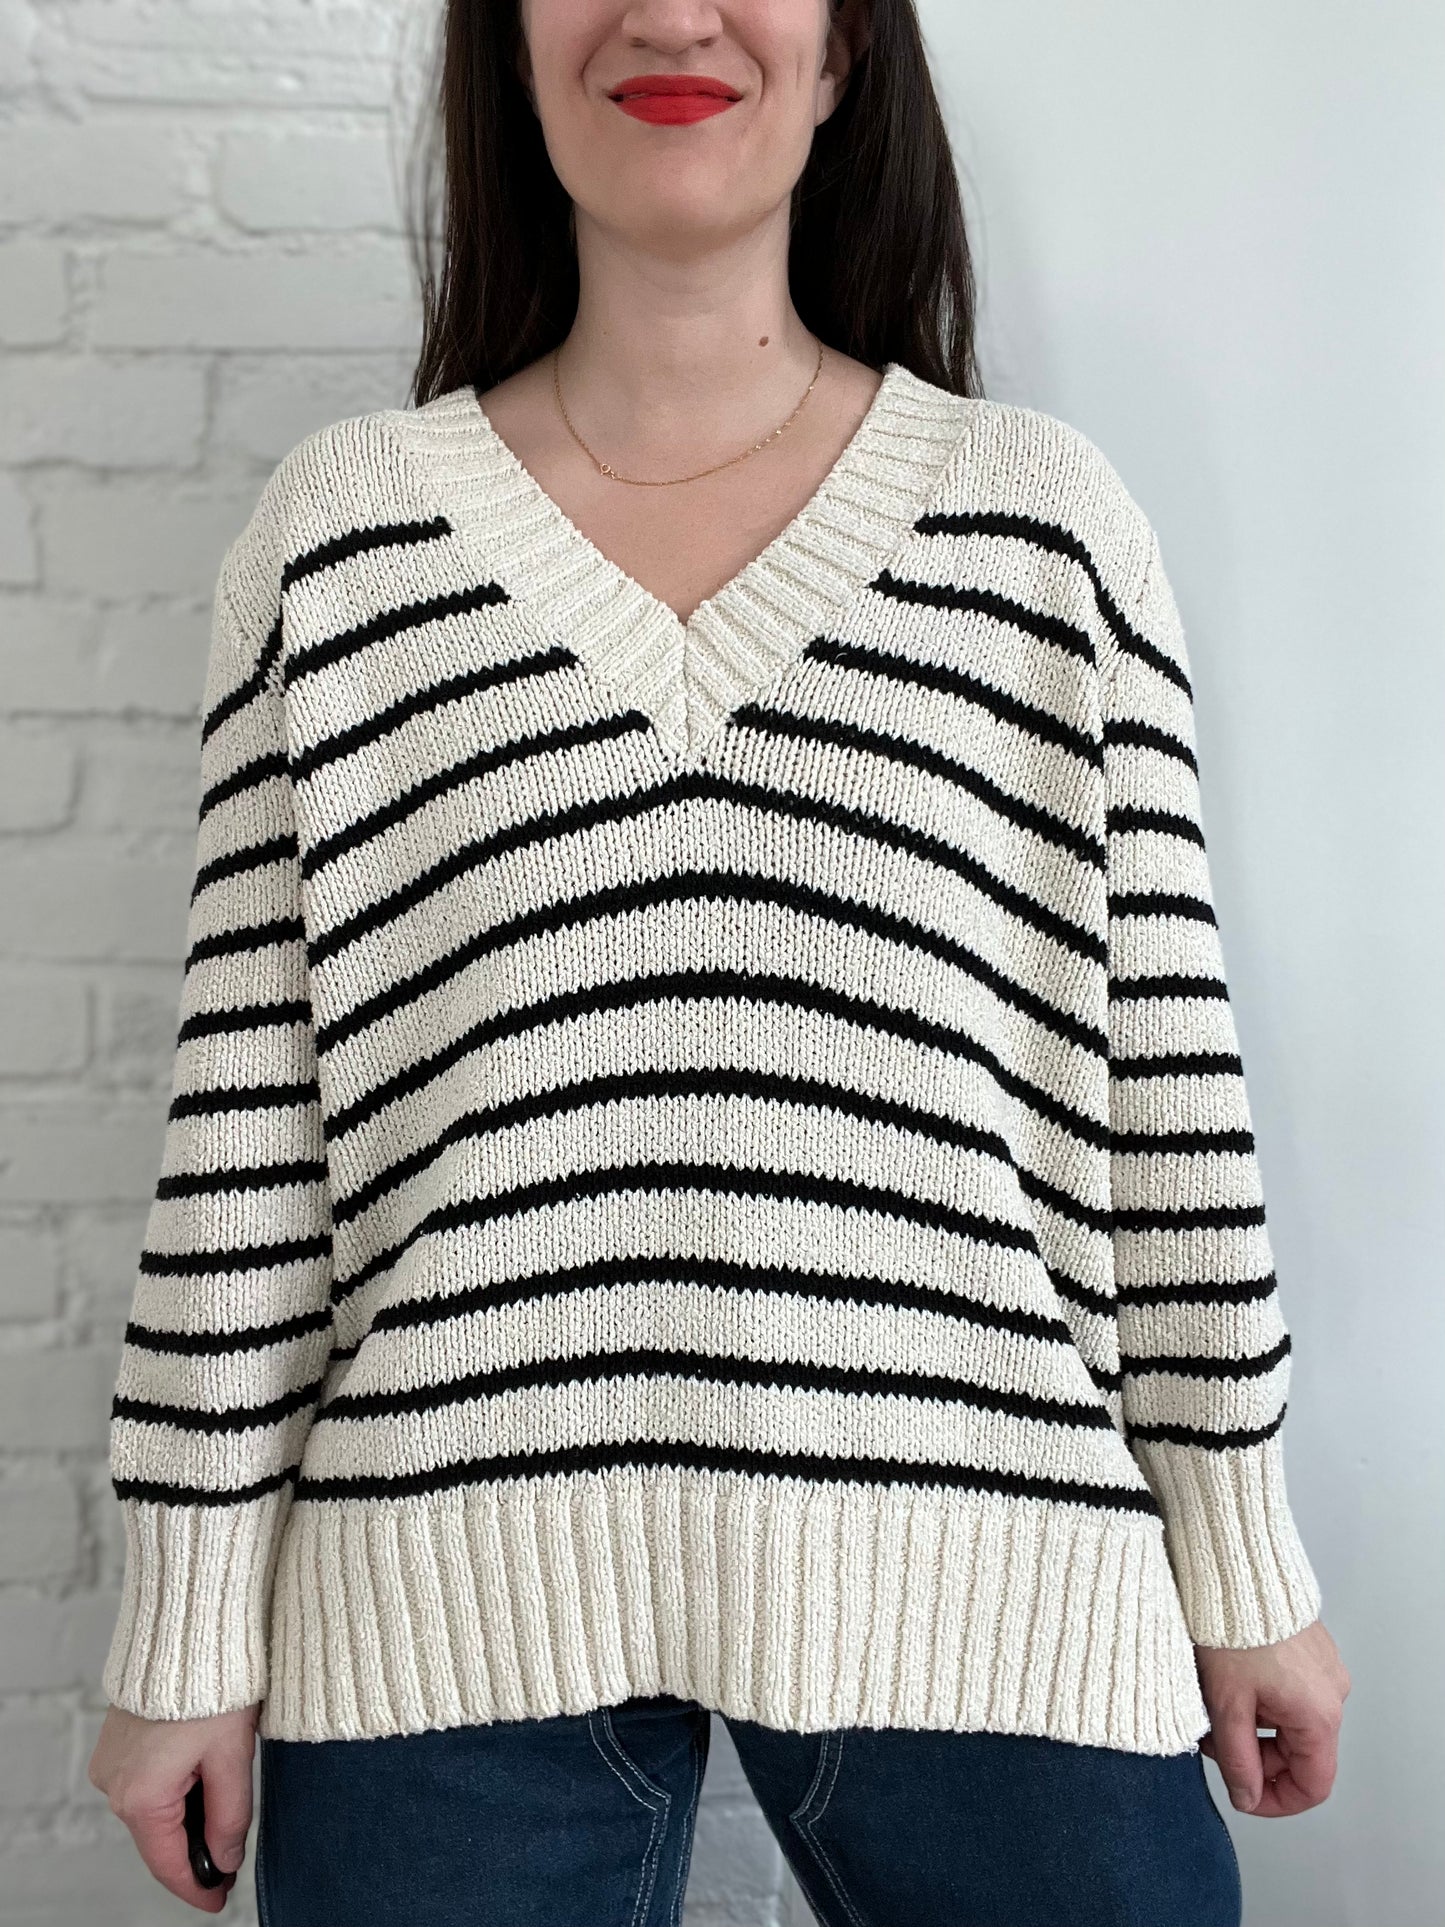 Relaxed Striped V-neck Sweater - M (Oversized)